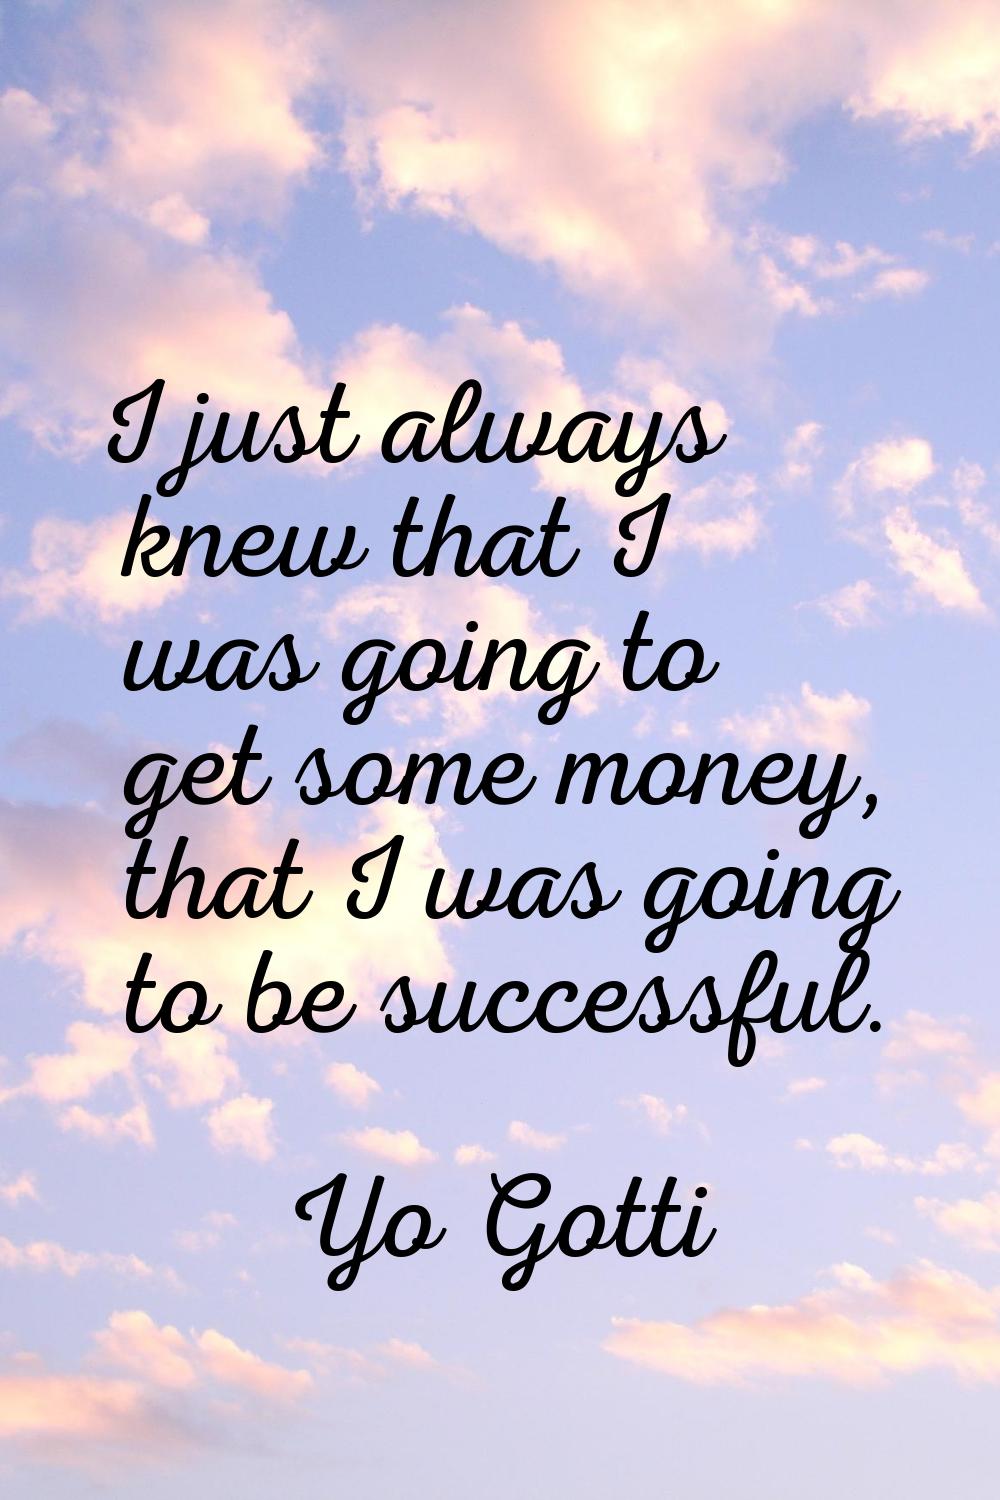 I just always knew that I was going to get some money, that I was going to be successful.